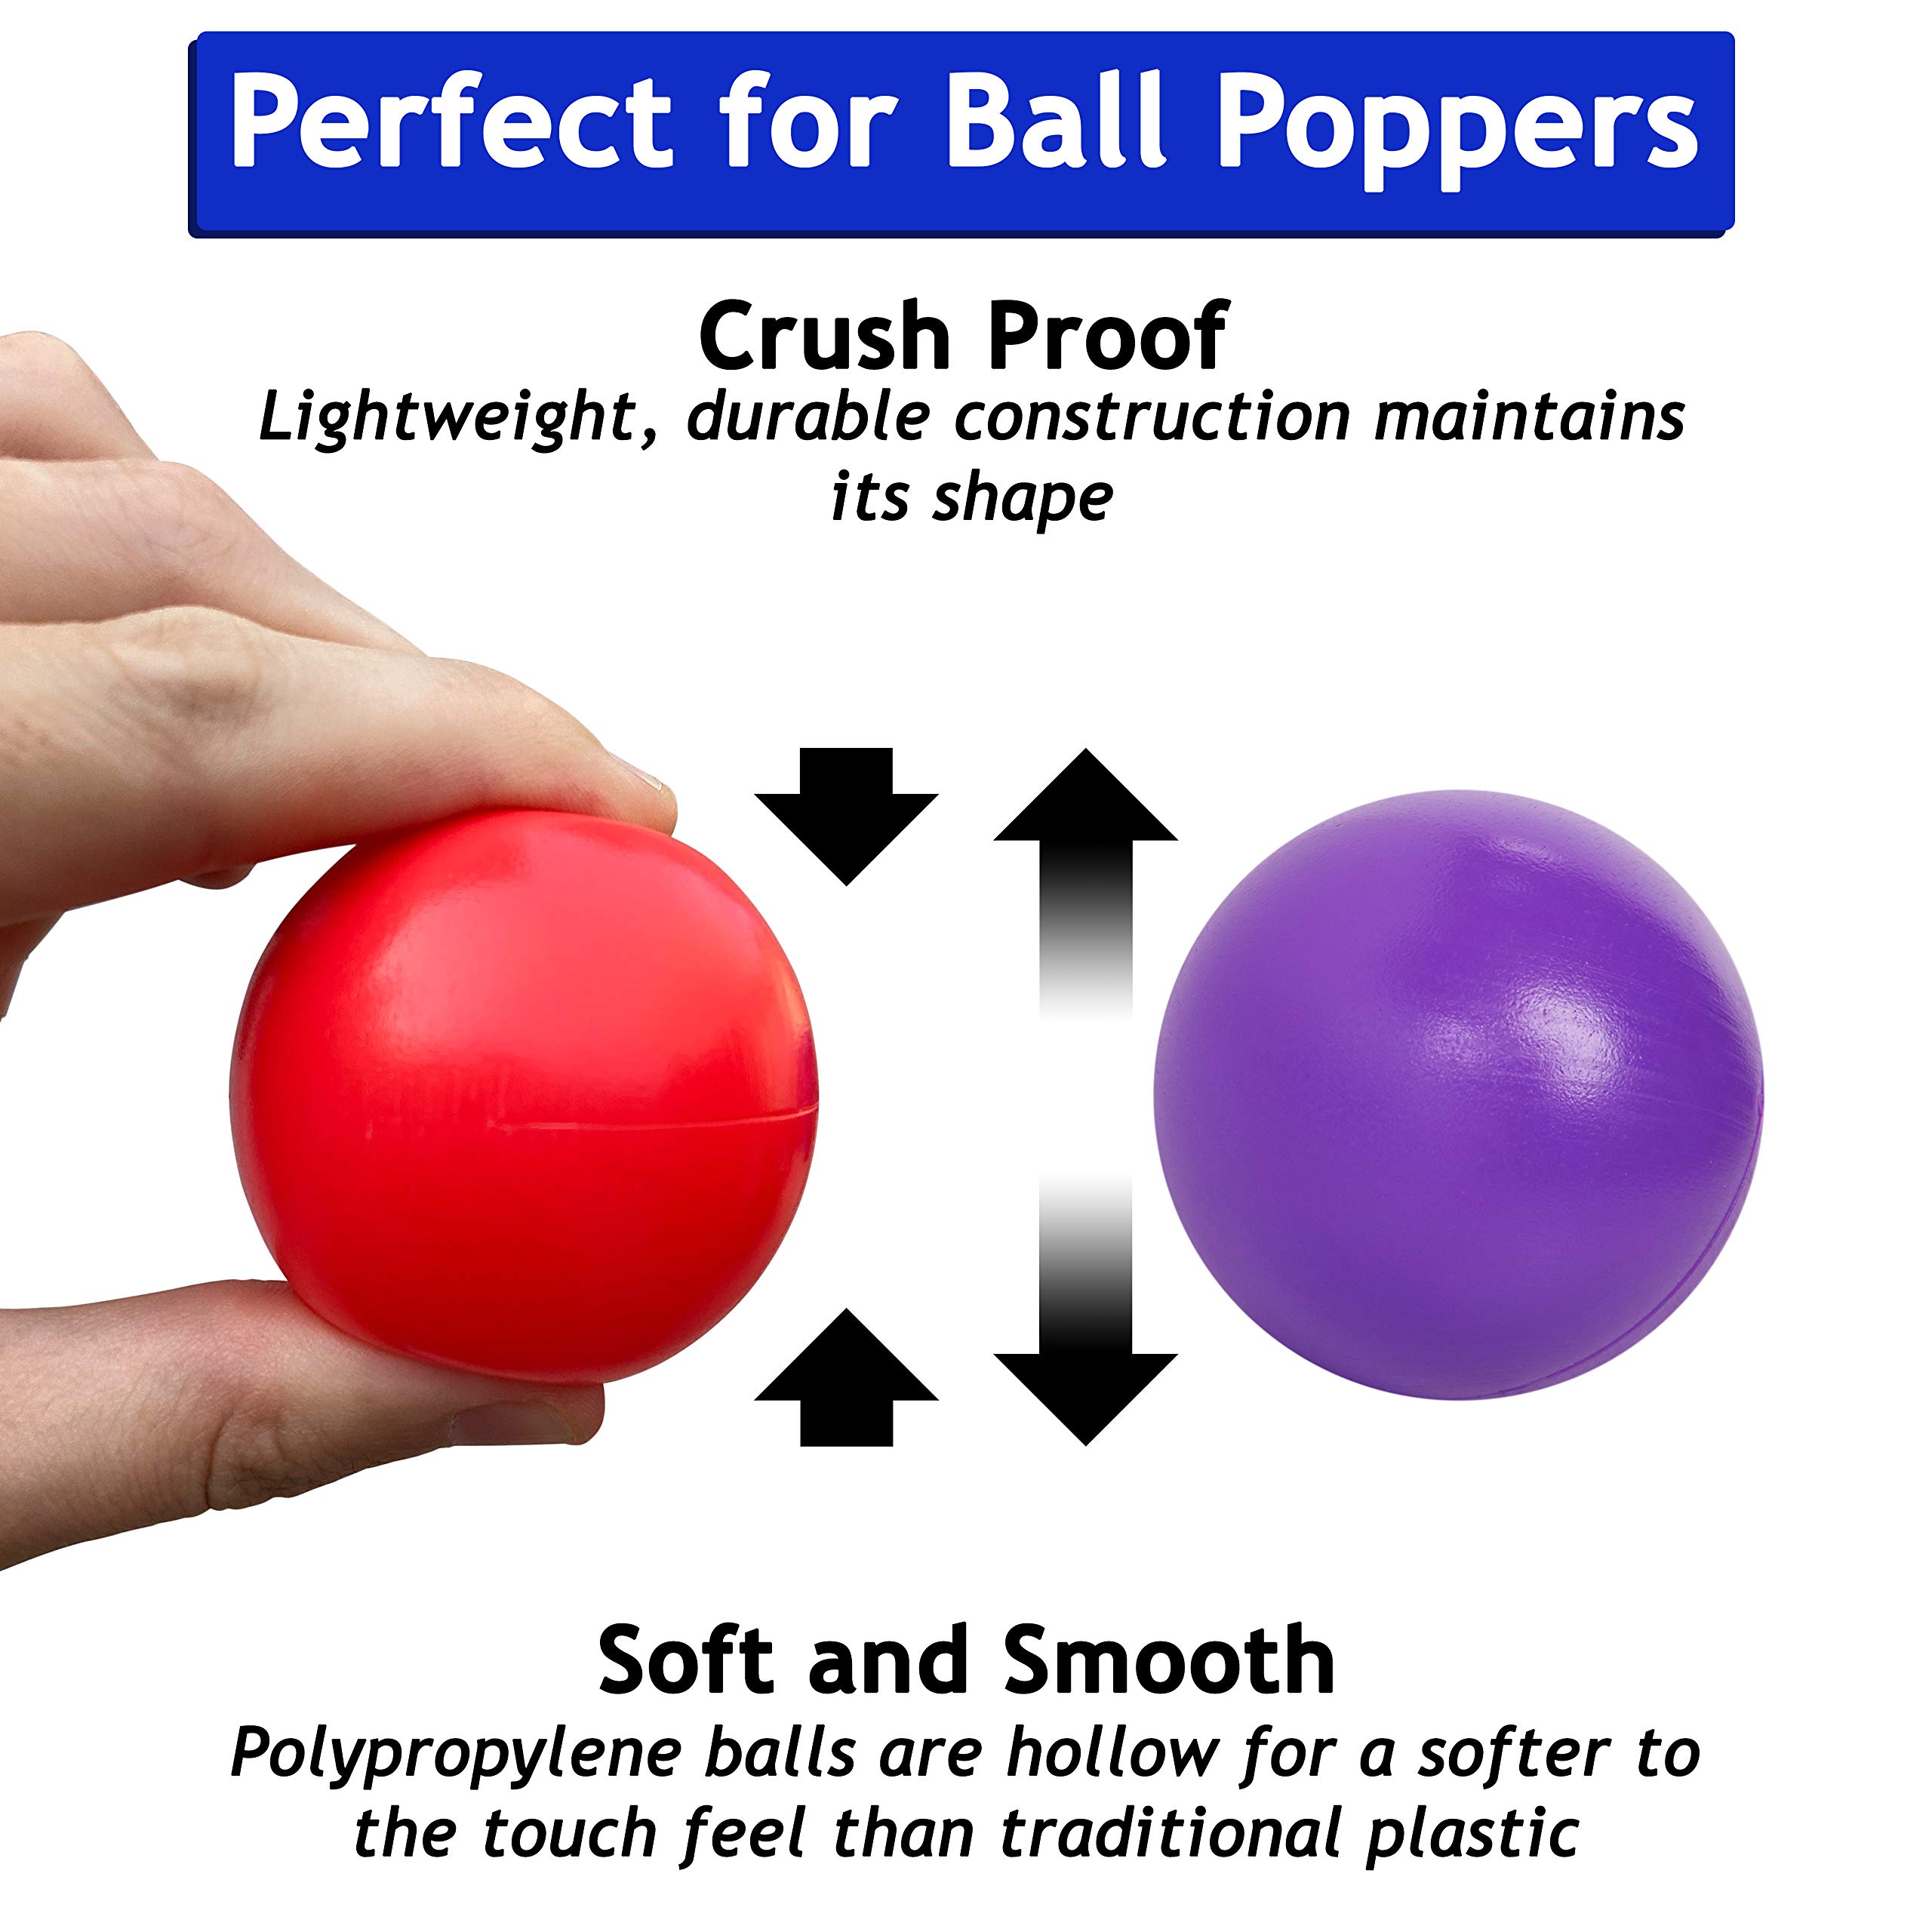 Multi-Colored Replacement Ball Set of 5 for Playskool Ball Popper Toys | Compatible with Busy Ball Popper Toy and playskool Elephant Ball Popper Replacement Balls | Colorful Baby Balls and Toy Balls